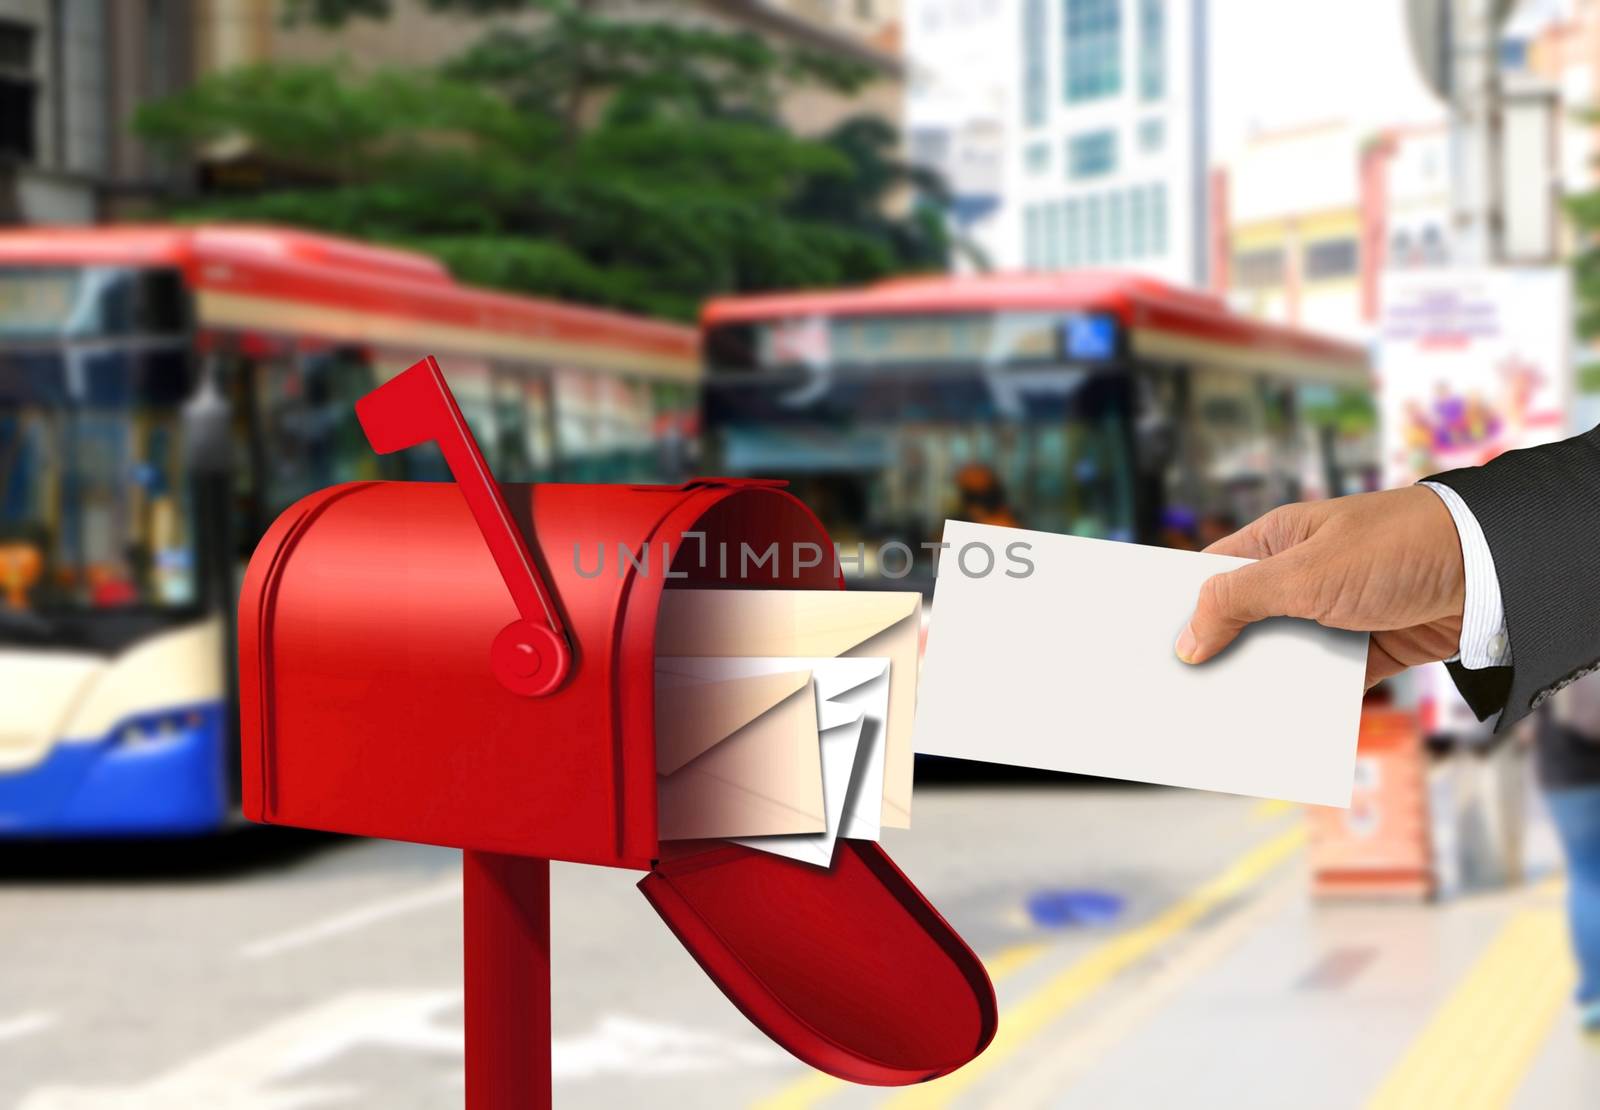 Hand taking a letter from a red postal box